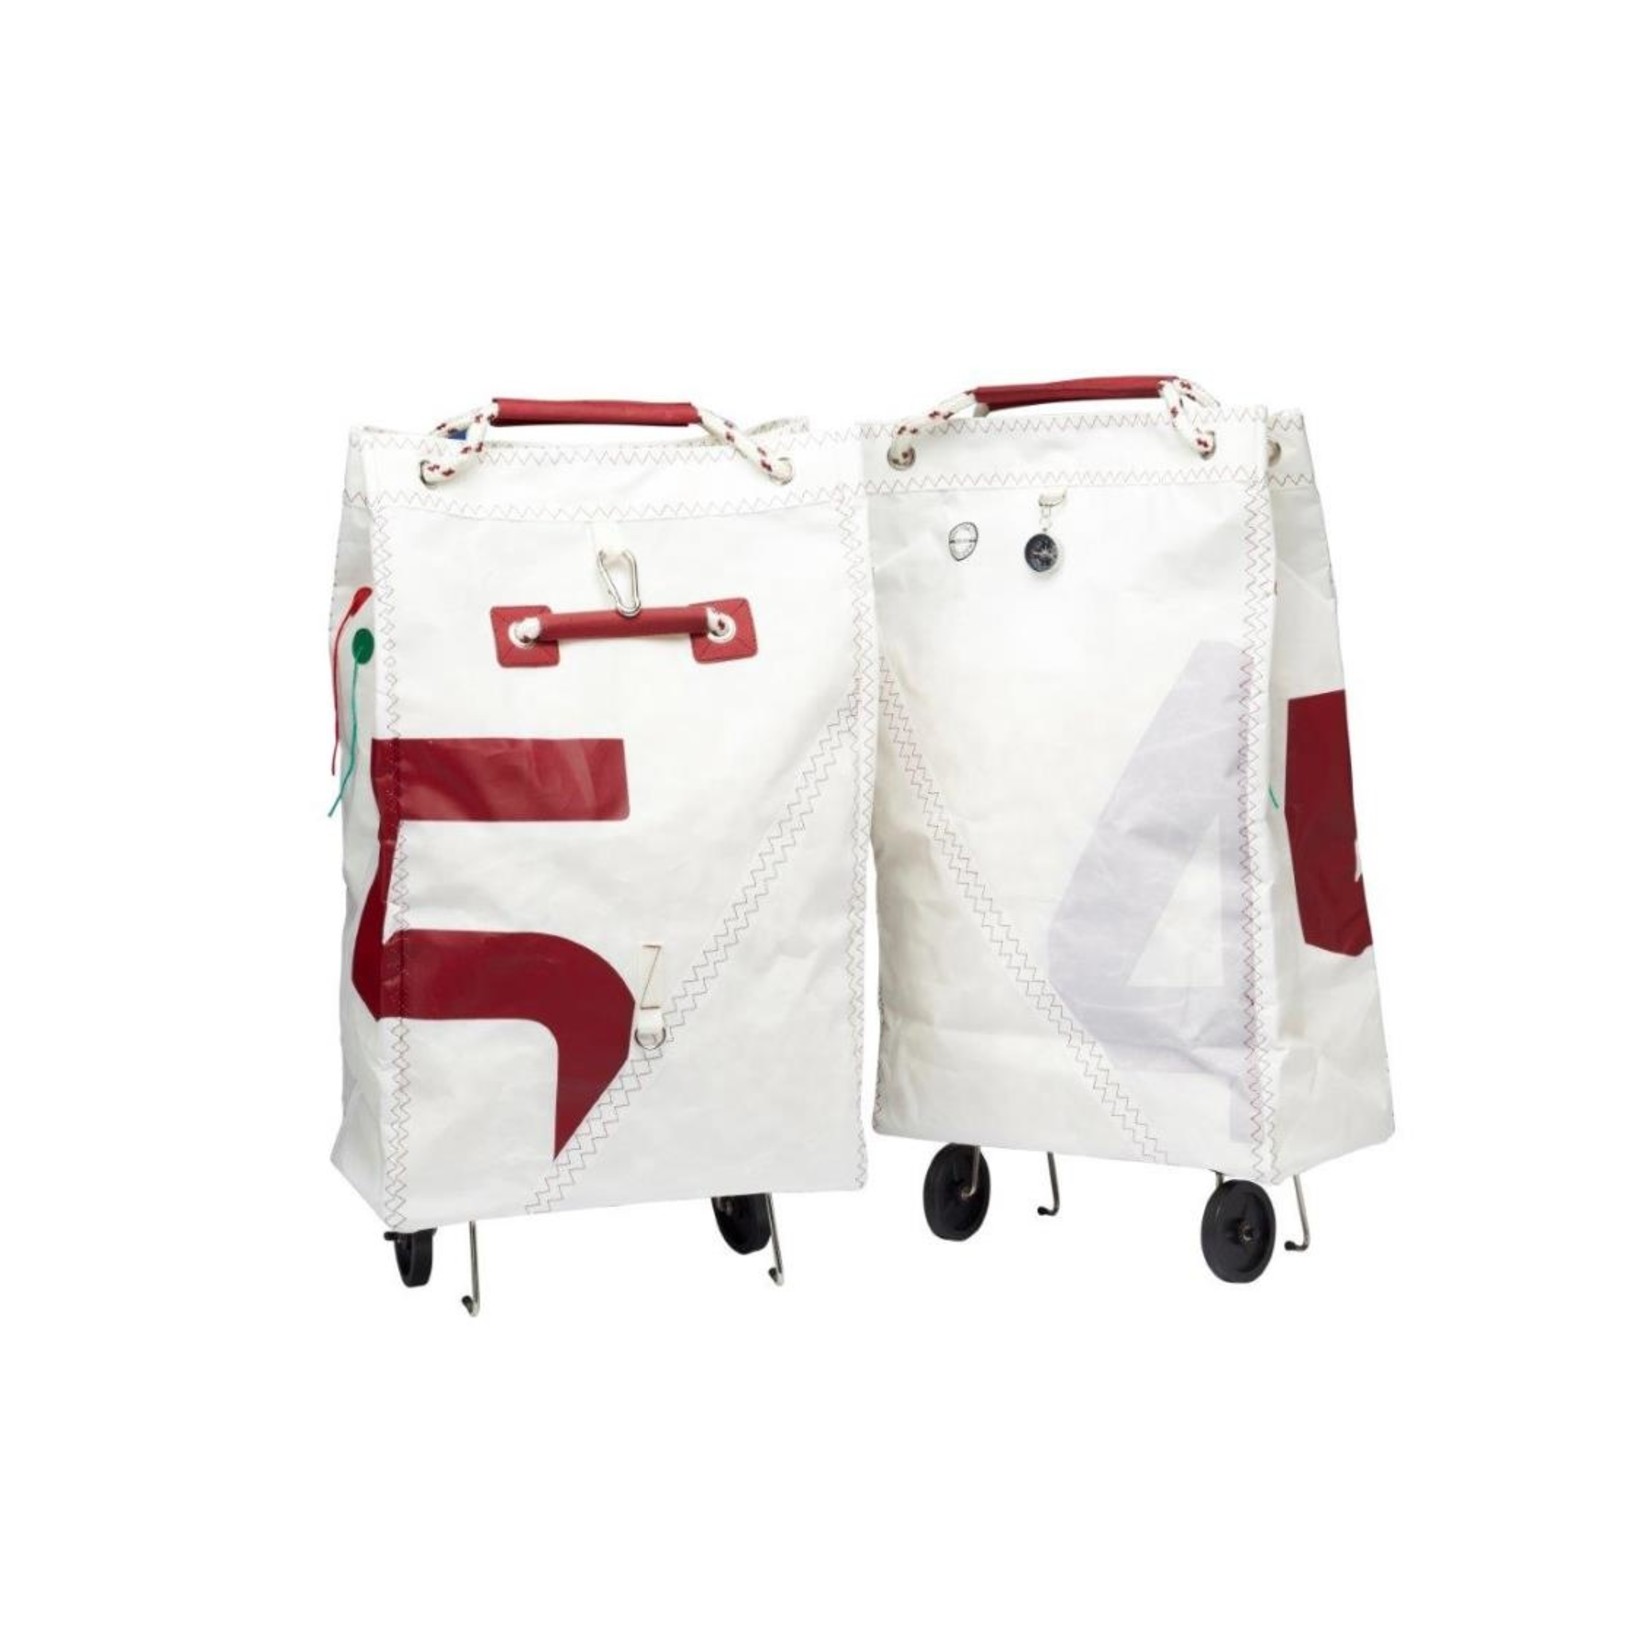 Trend Marine Sailcloth shopping bag foldable on wheels Sea King red